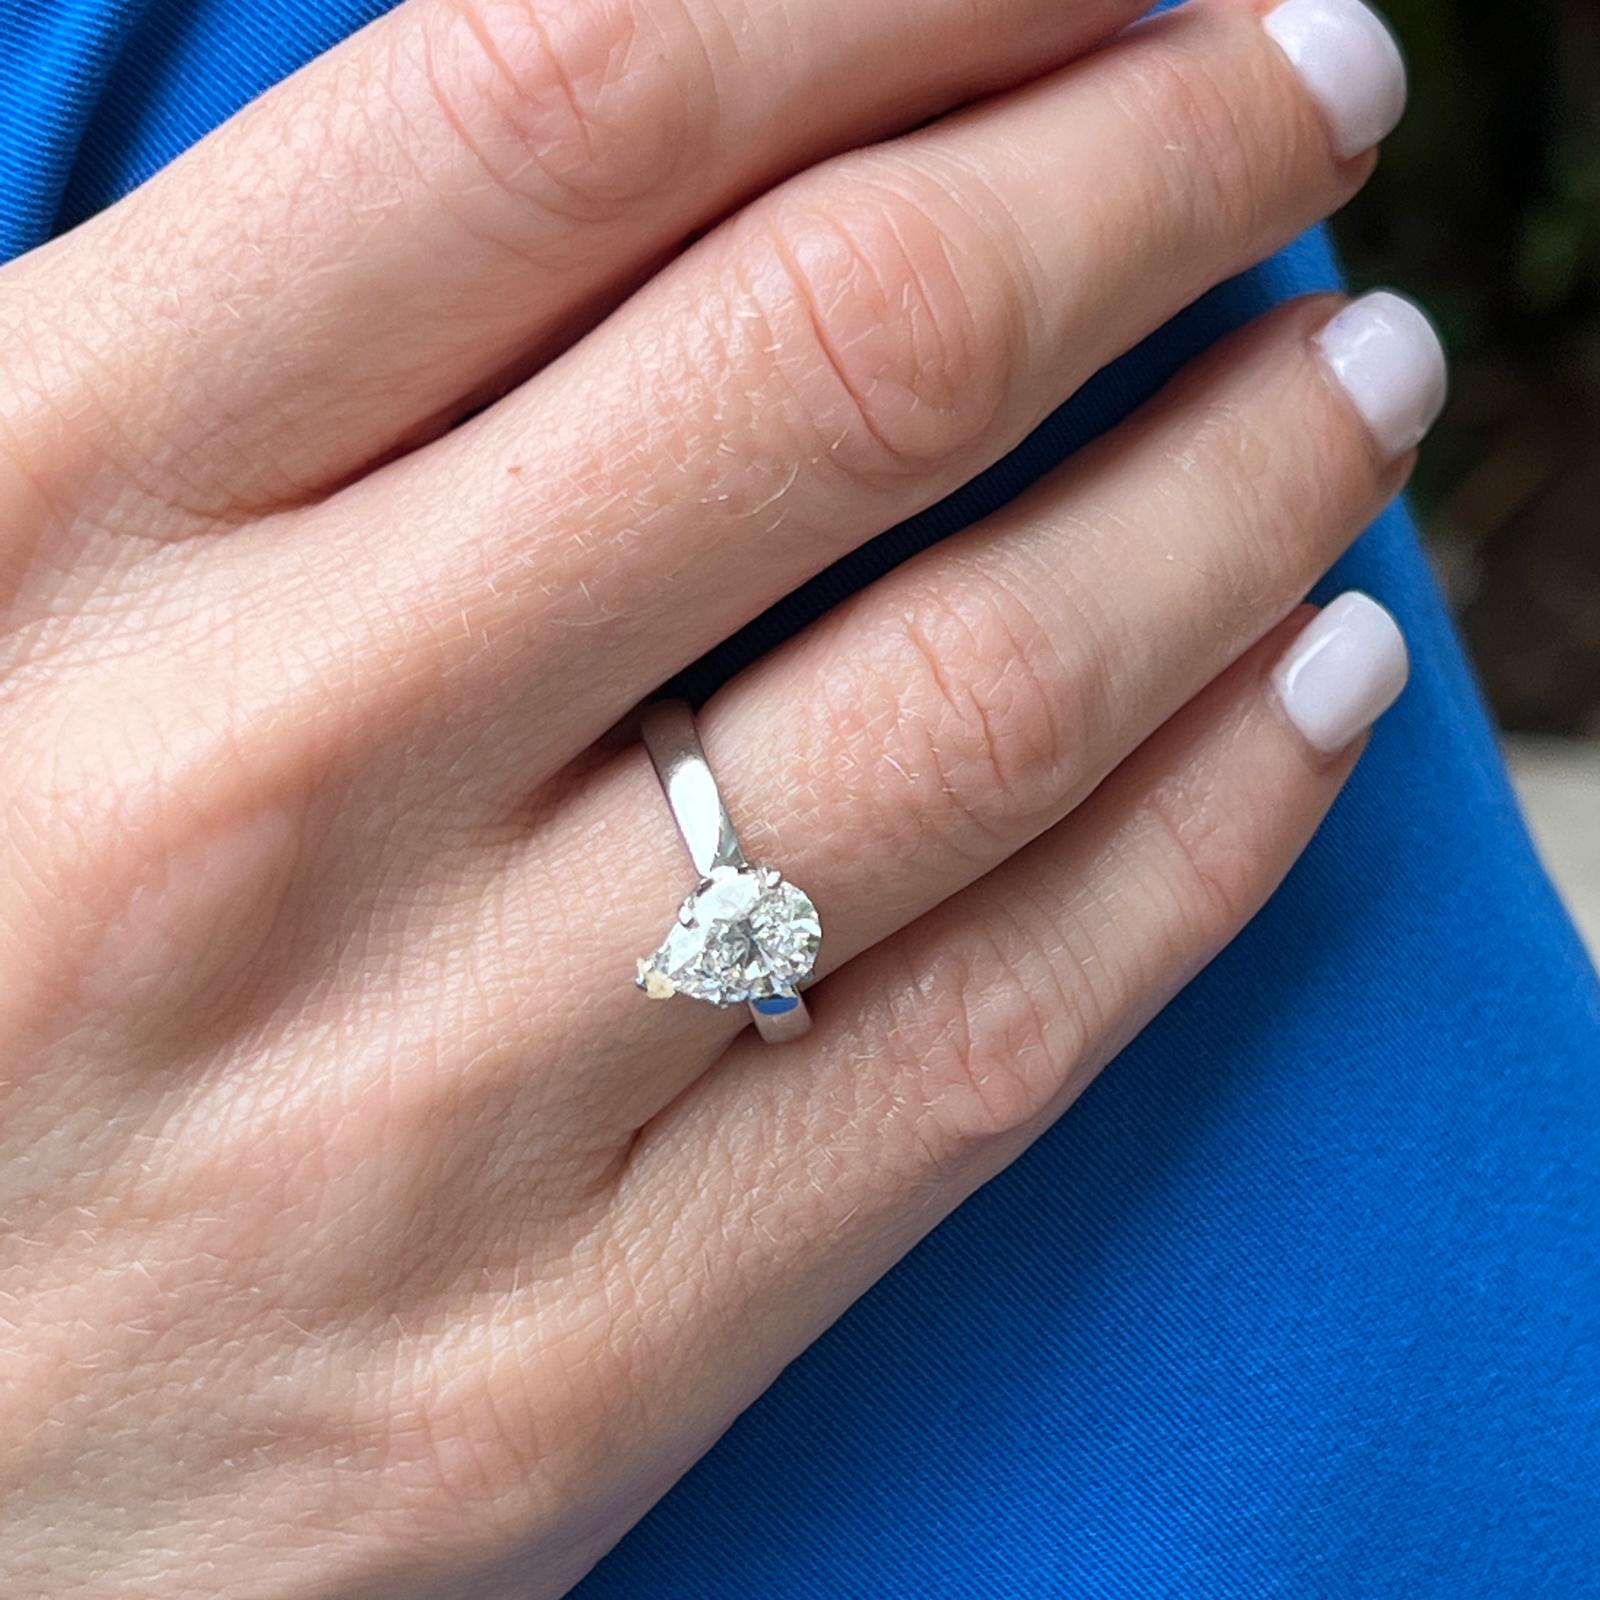 Pear shape diamond engagement ring fashioned in platinum. The solitaire features an 1.51 carat pear shape diamond graded by the GIA G color and VS2 clarity. The ring is currently size 5.75 (can be sized), and the shank measures 3.2mm in width. 